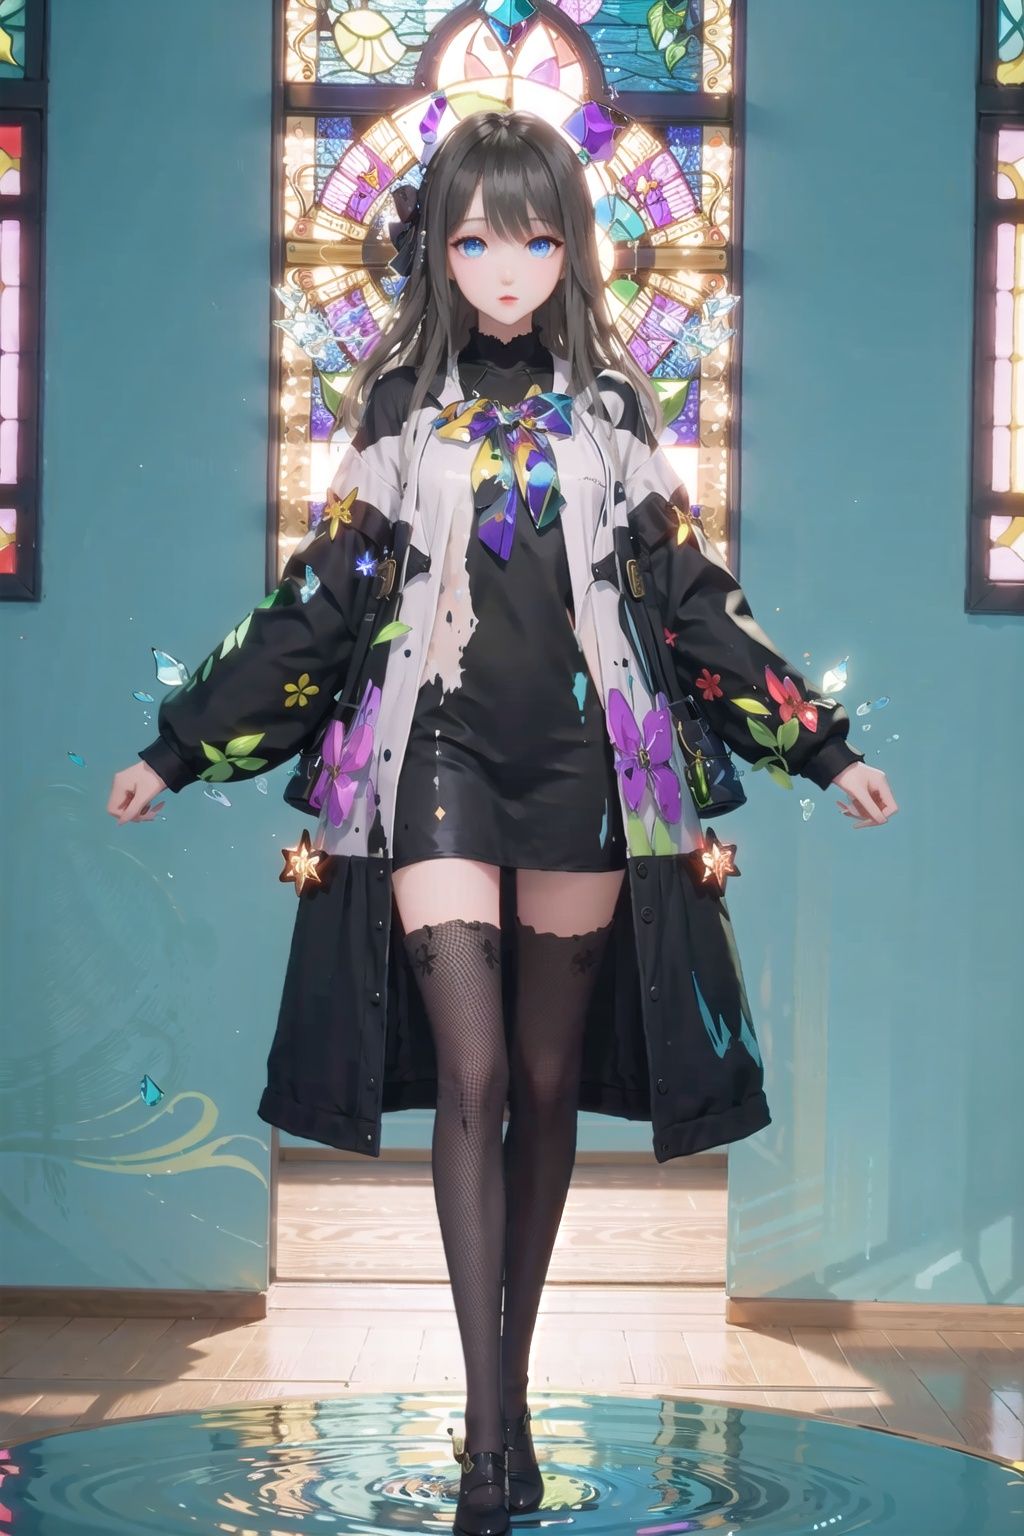 ｛Glass painting｝,（stained glass）,God Light,colorful ,story,1girl,black_hair,blue_eyes,hair_ornaments,full_body,coat,, <lora:EMS-591-EMS:0.2>, <lora:EMS-8703-EMS:0.7>